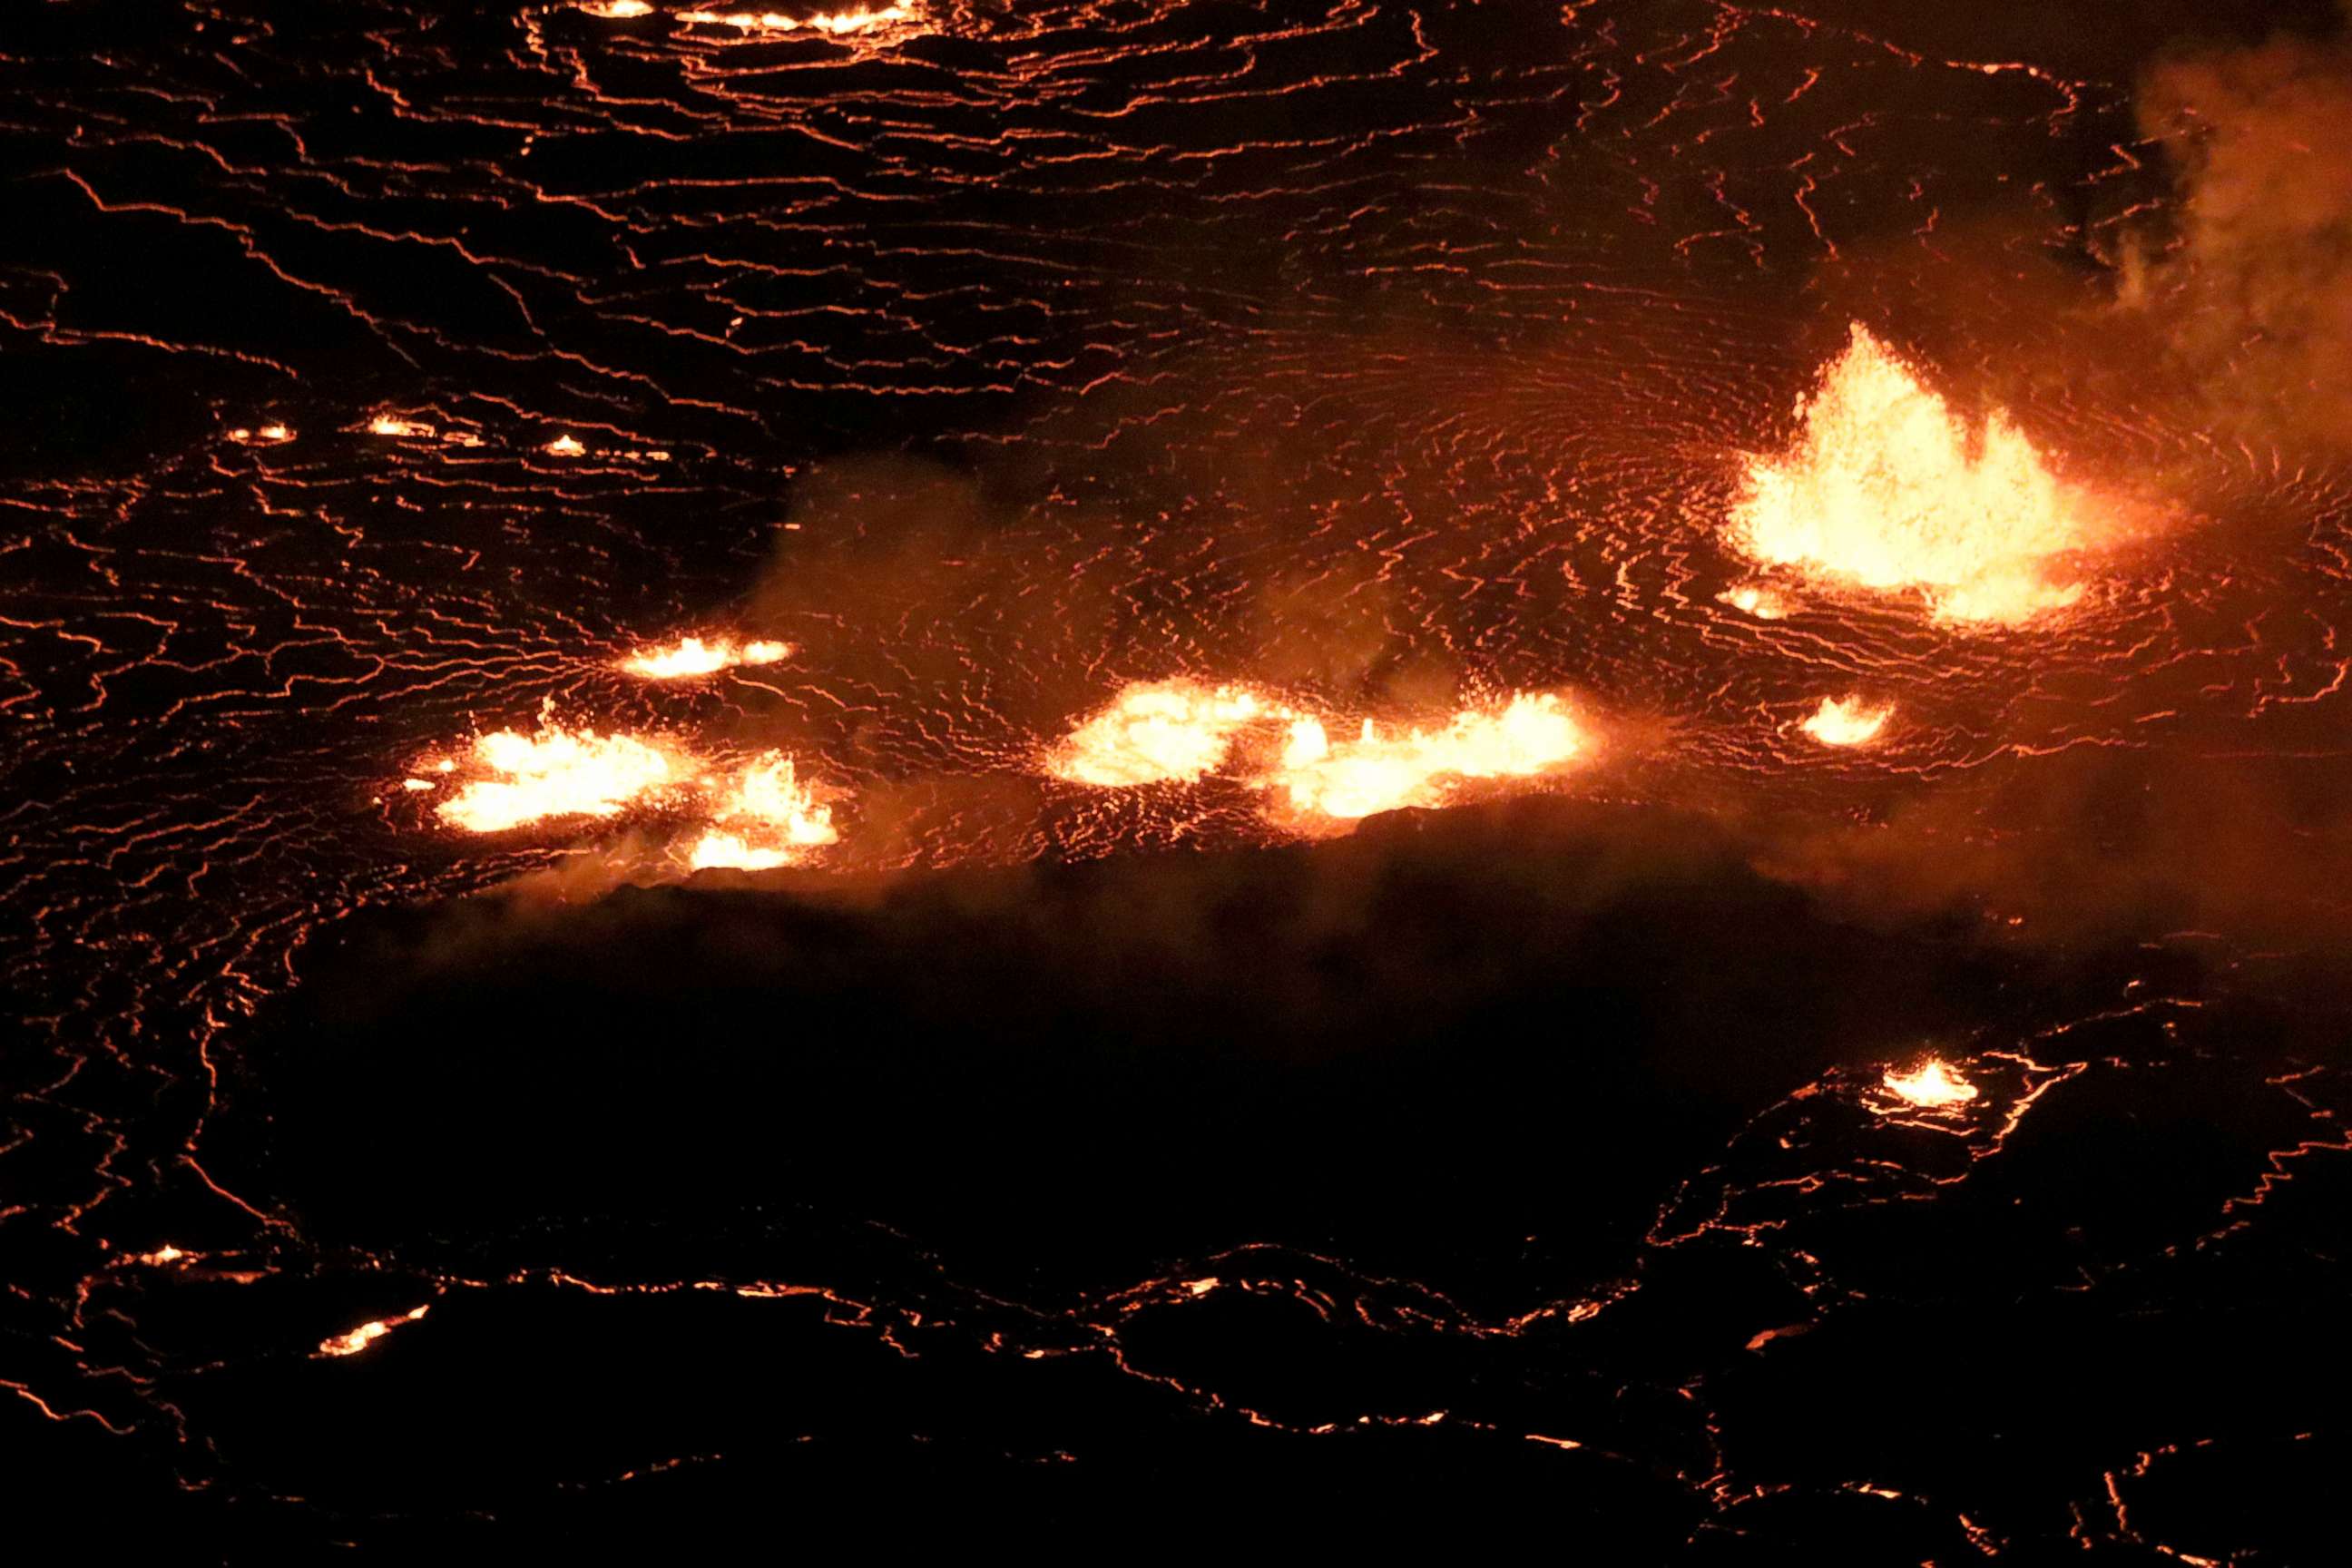 PHOTO: A rising lava lake is seen within Halema'uma'u crater during the eruption of Kilauea volcano in Hawaii National Park, Sept. 29, 2021.